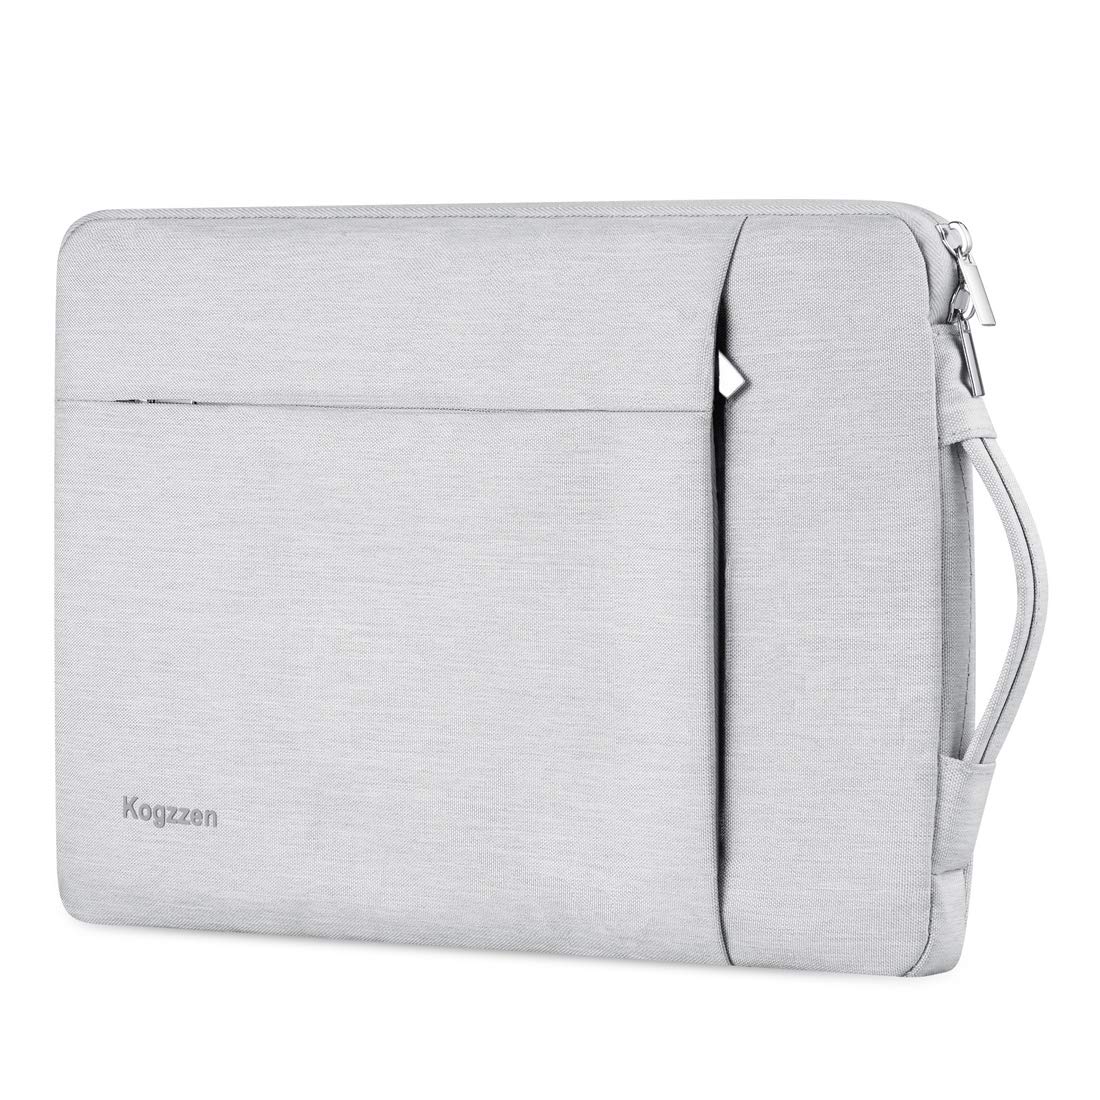 Laptop Bags & Cases - Buy Laptop Bags & Cases at Best Price in Bangladesh |  www.daraz.com.bd